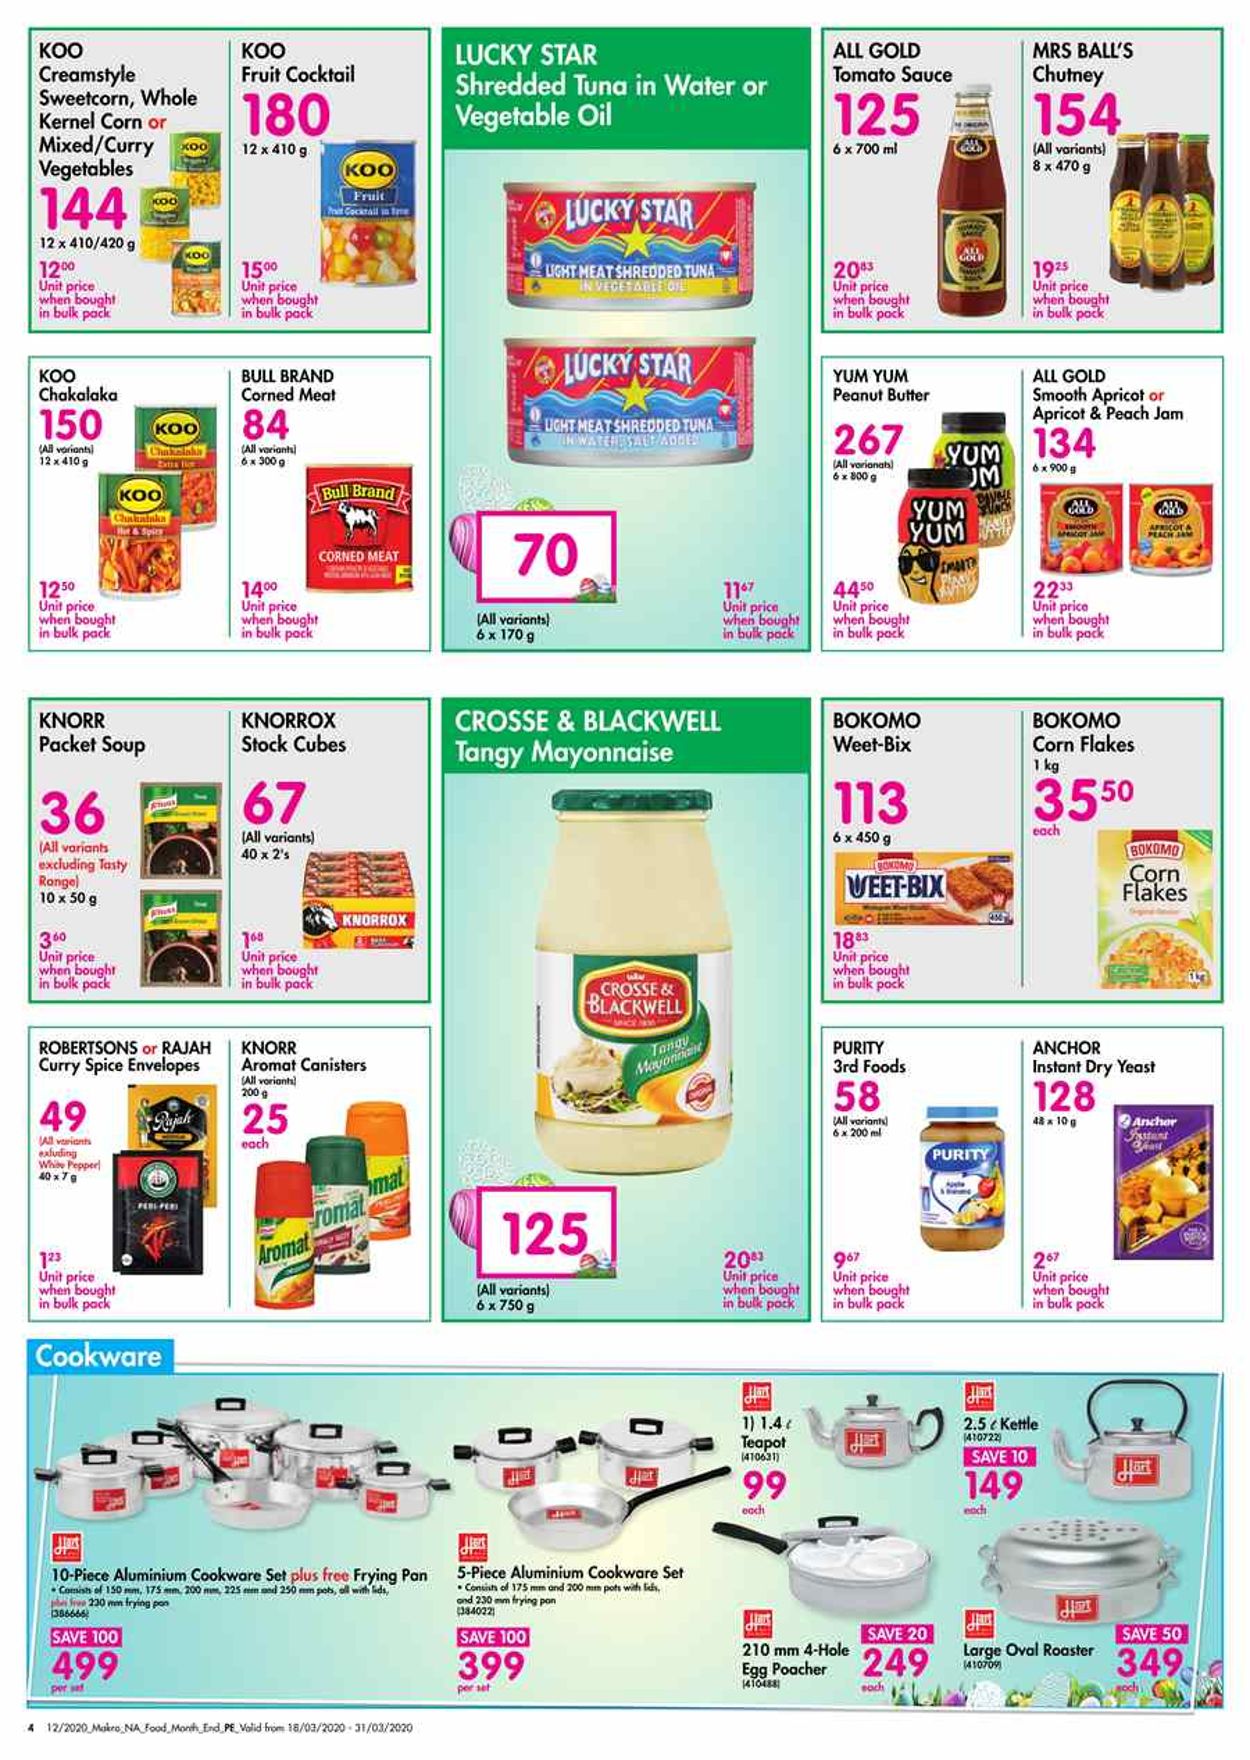 Makro Catalogue from 2020/03/18